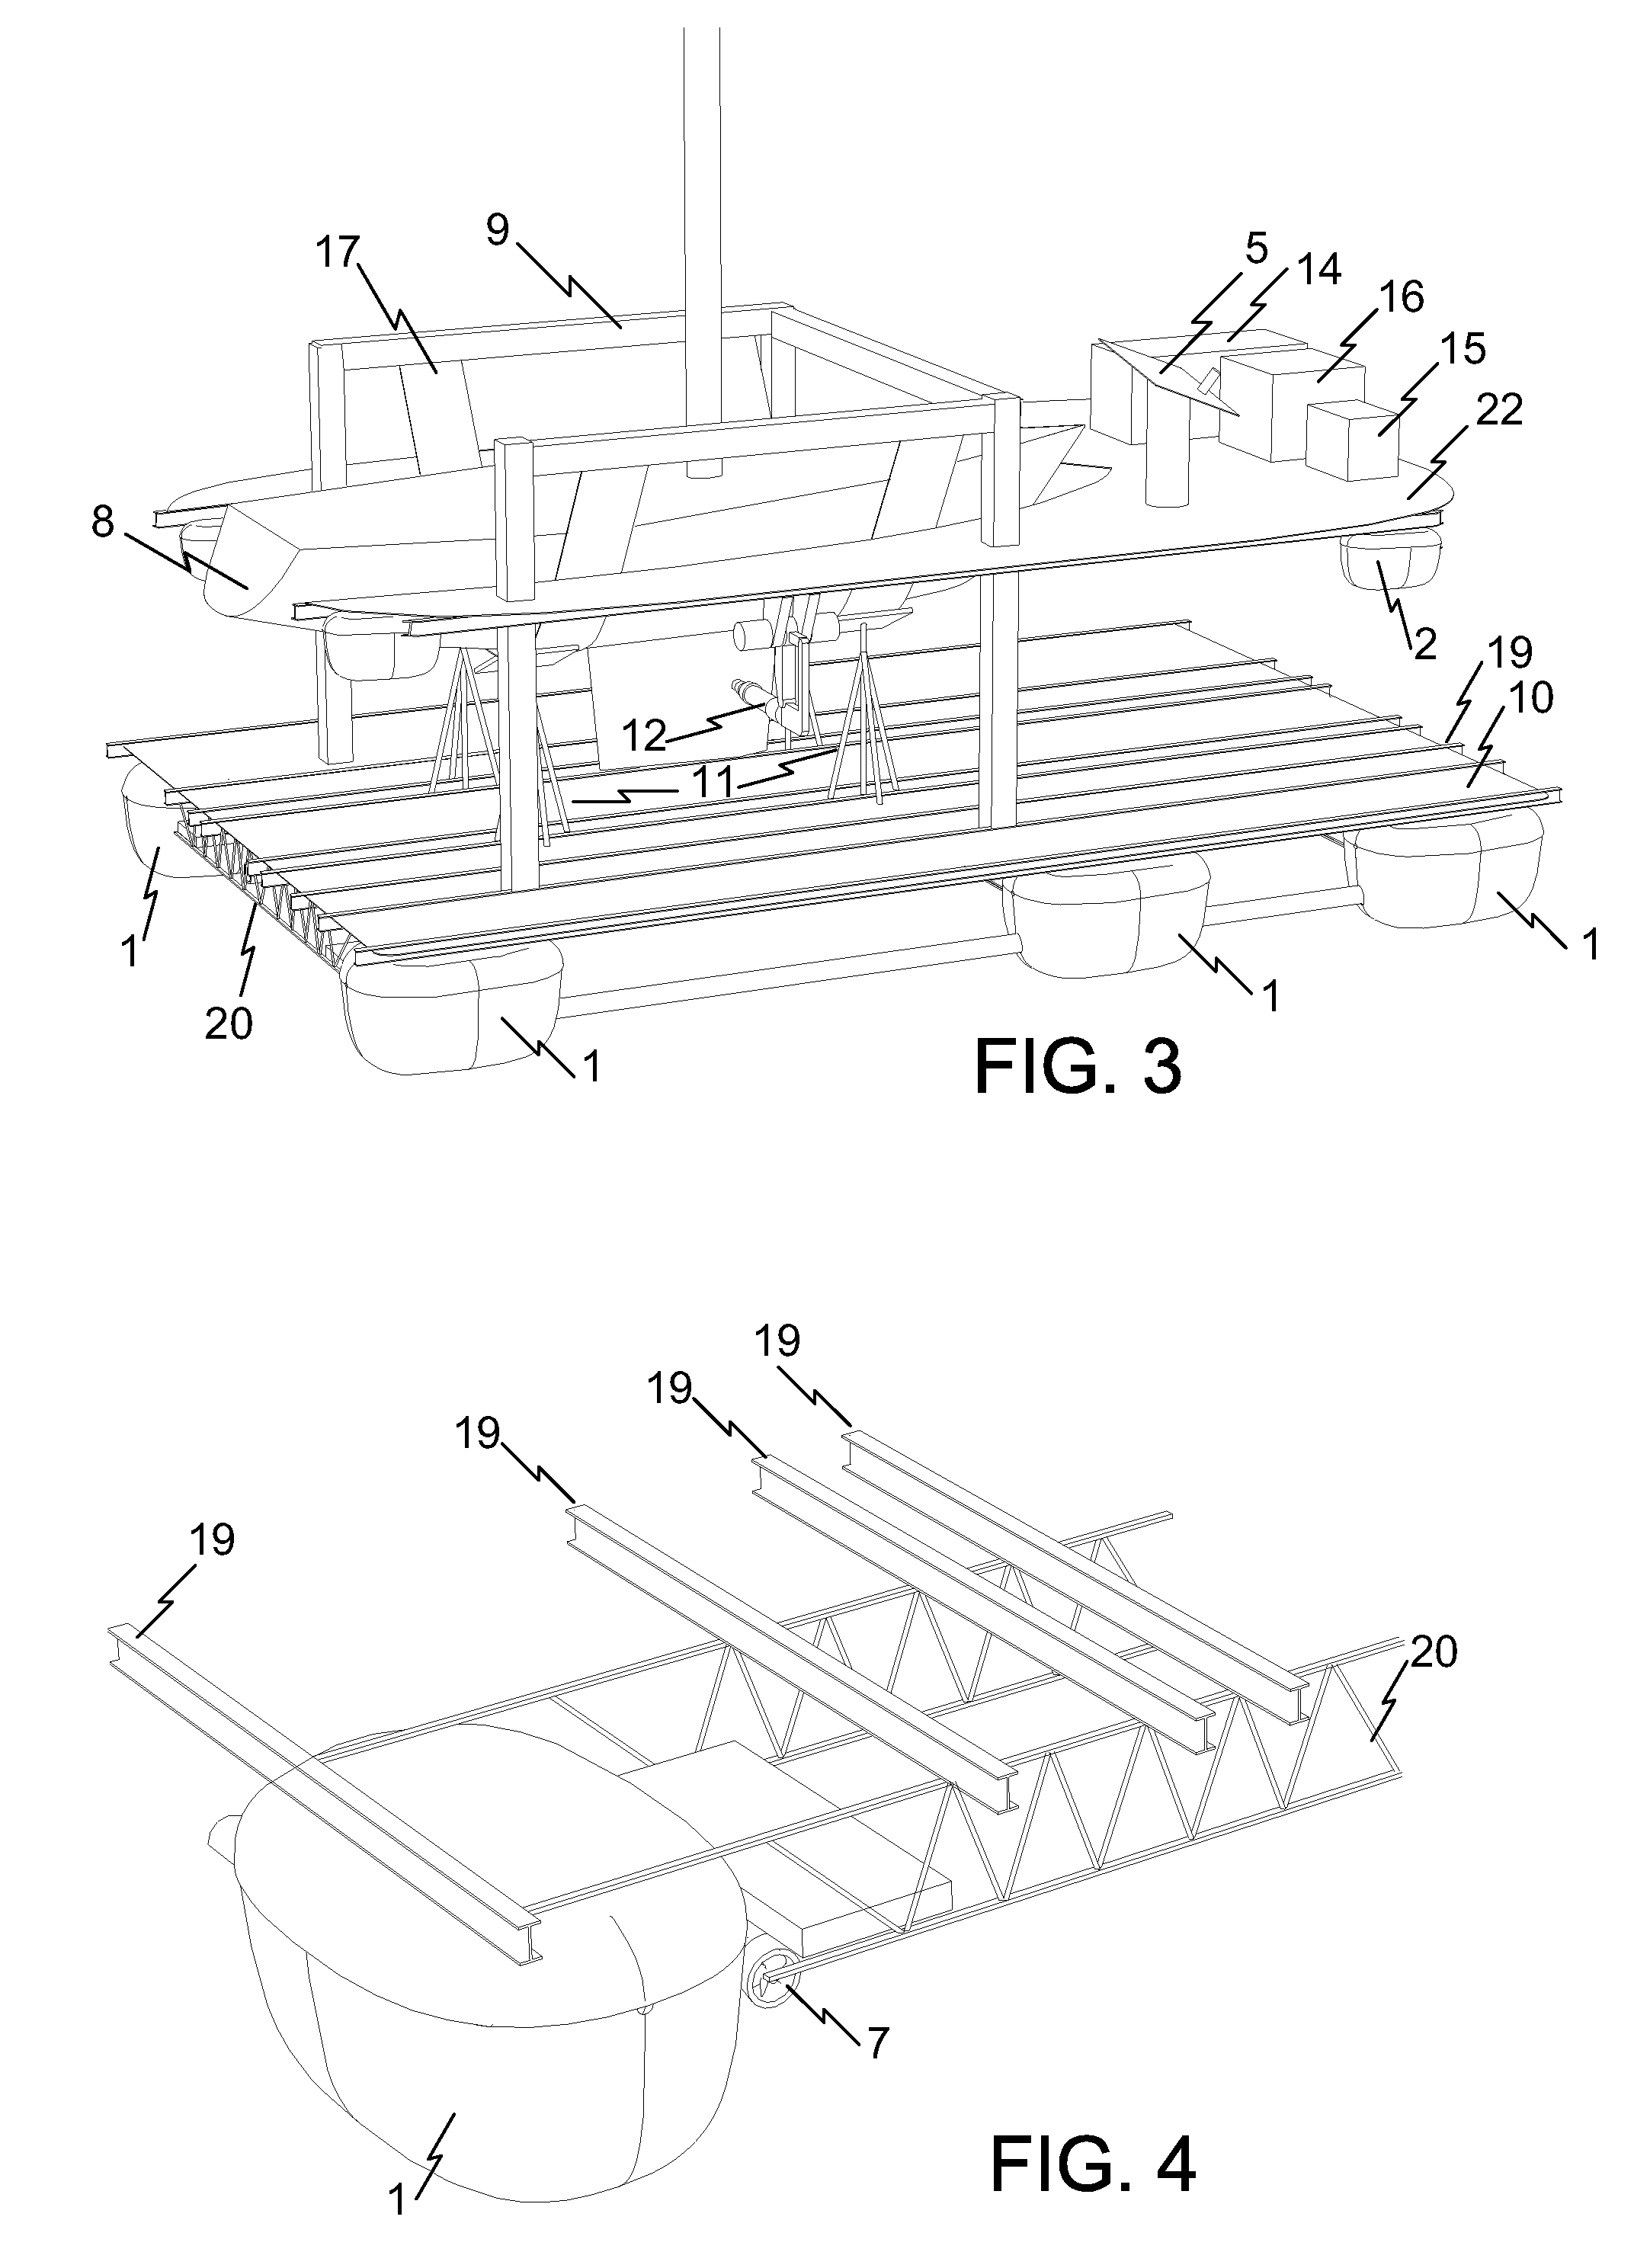 Portable dry dock system and method for commercial servicing of recreational vessels in inland waterways